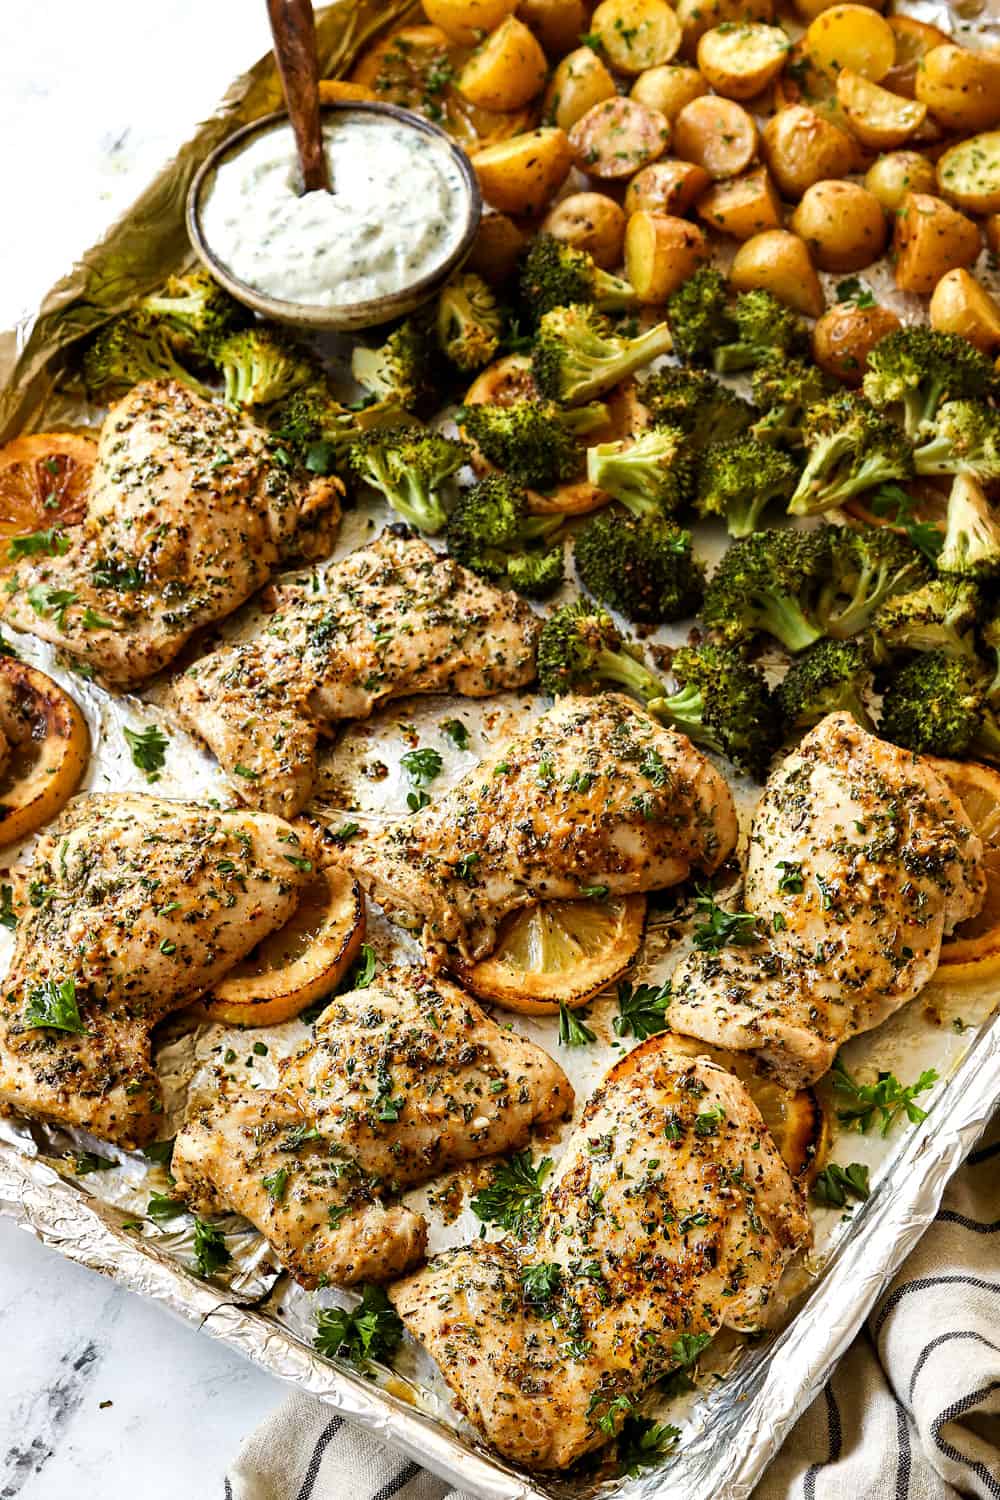 lemon garlic chicken thighs on a sheet pan with broccoli and potatoes